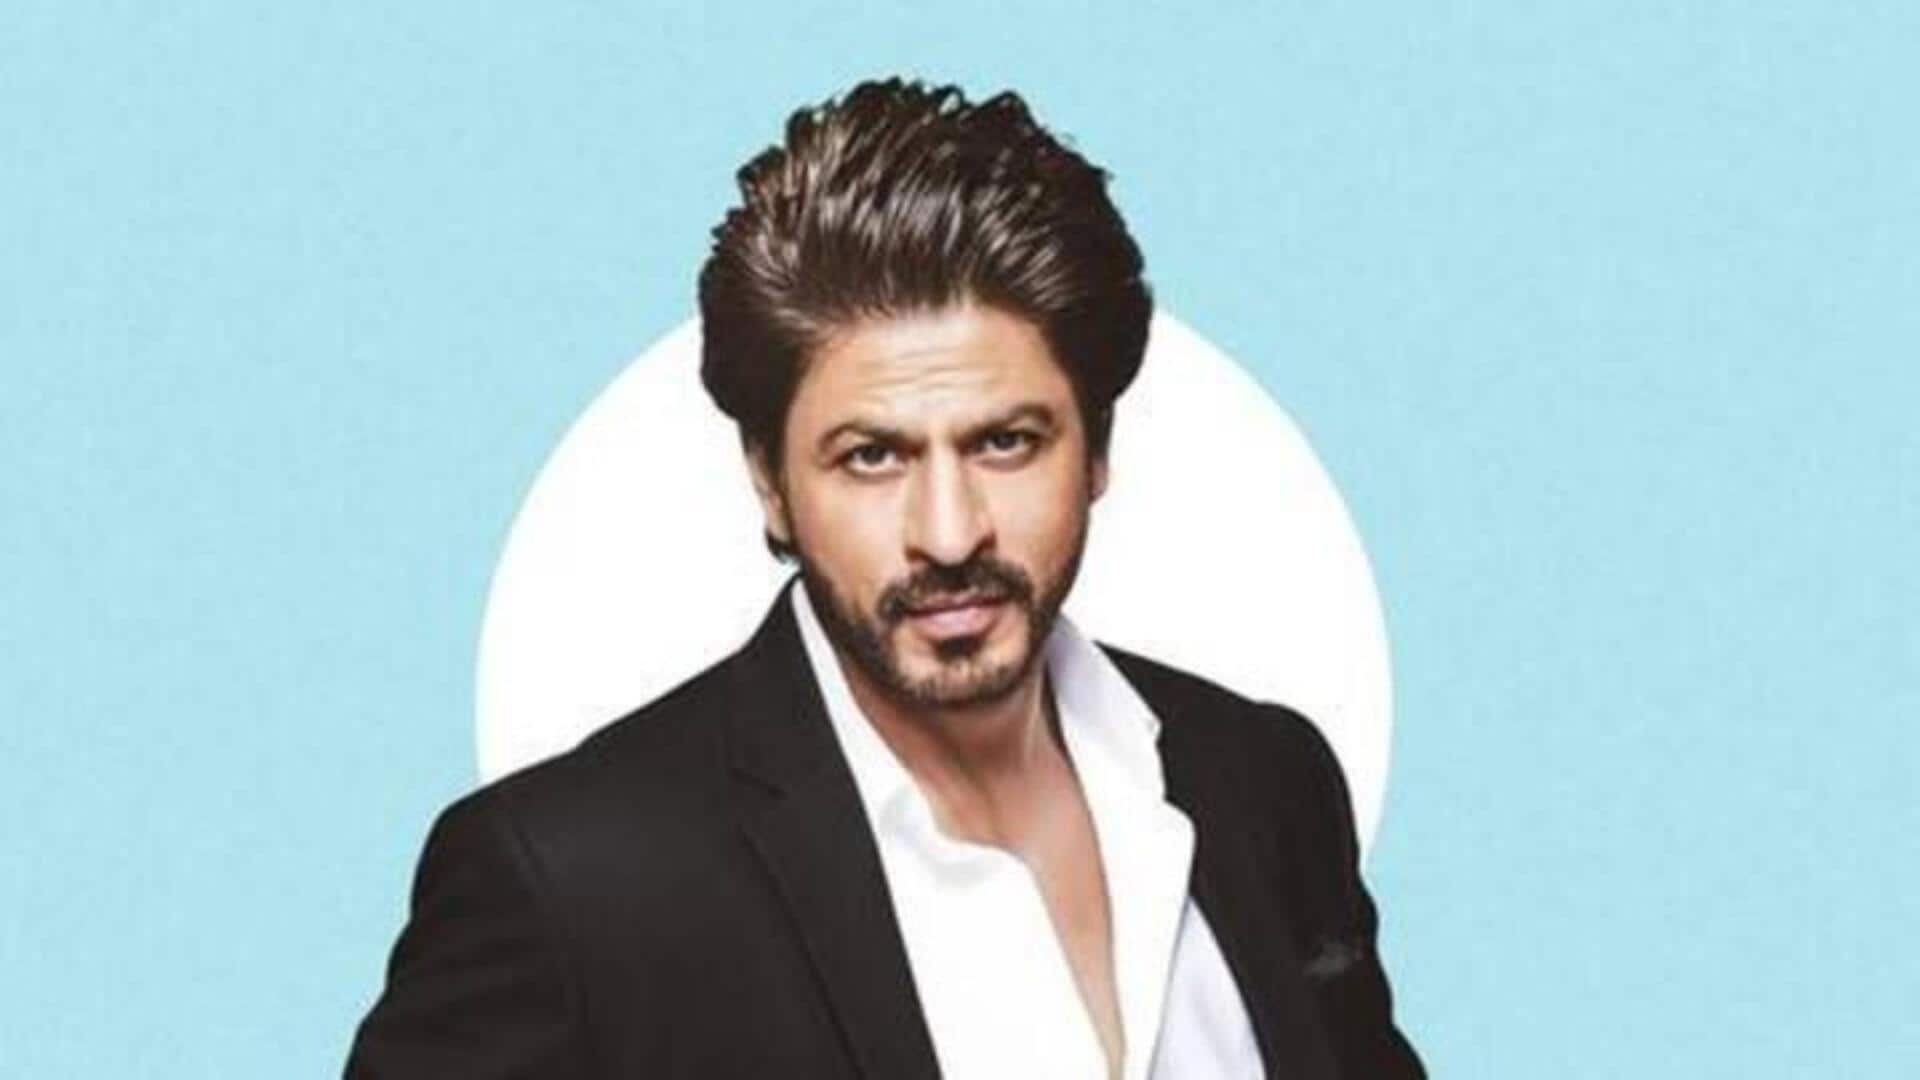 Shah Rukh Khan opts out of 'King'; his upcoming projects